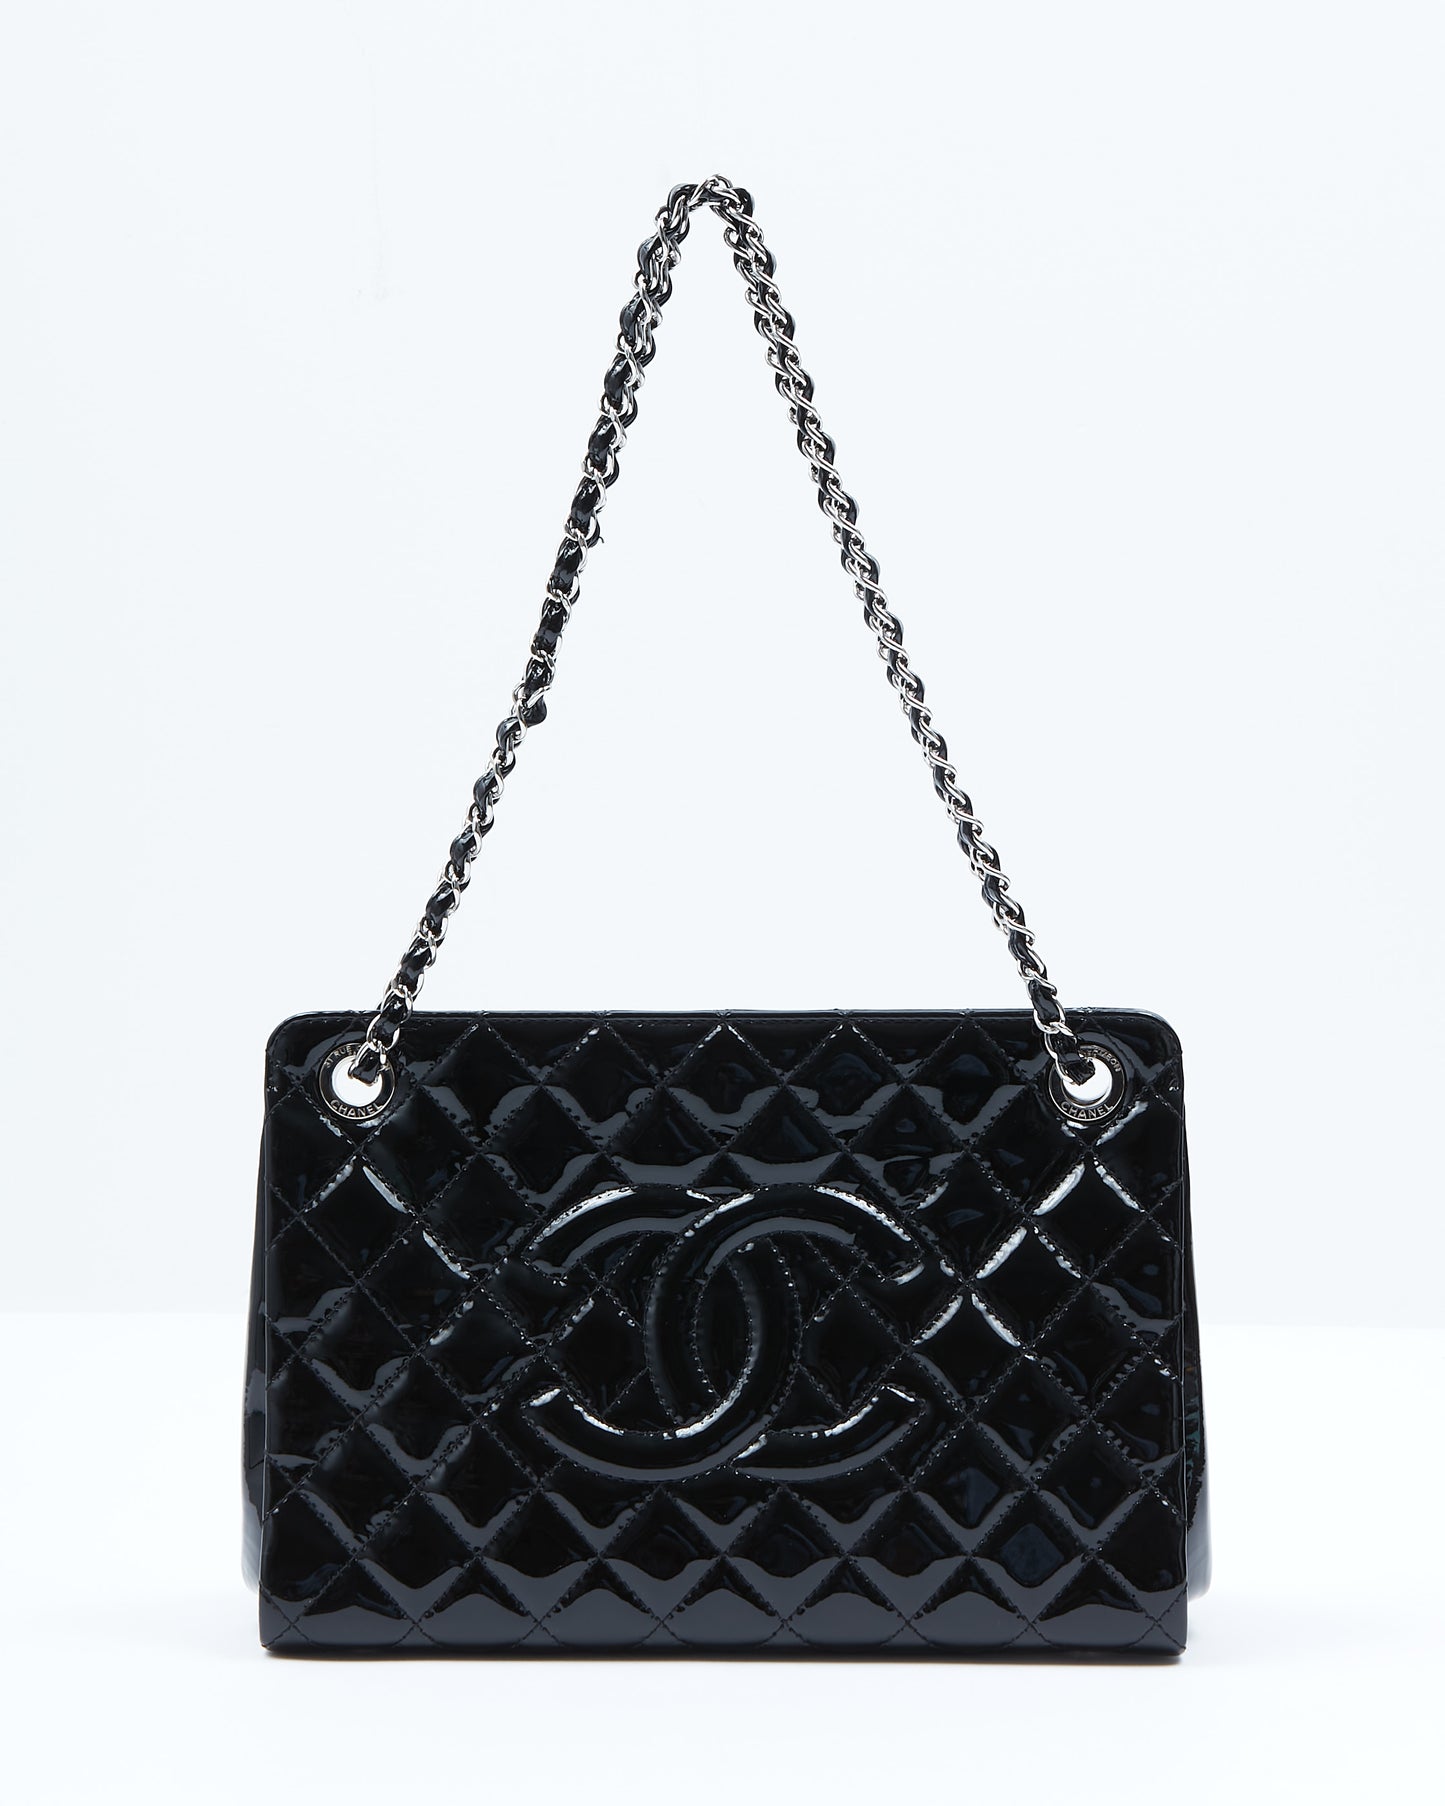 Chanel Black Patent Quilted CC Timeless Shopper Tote Chain Bag